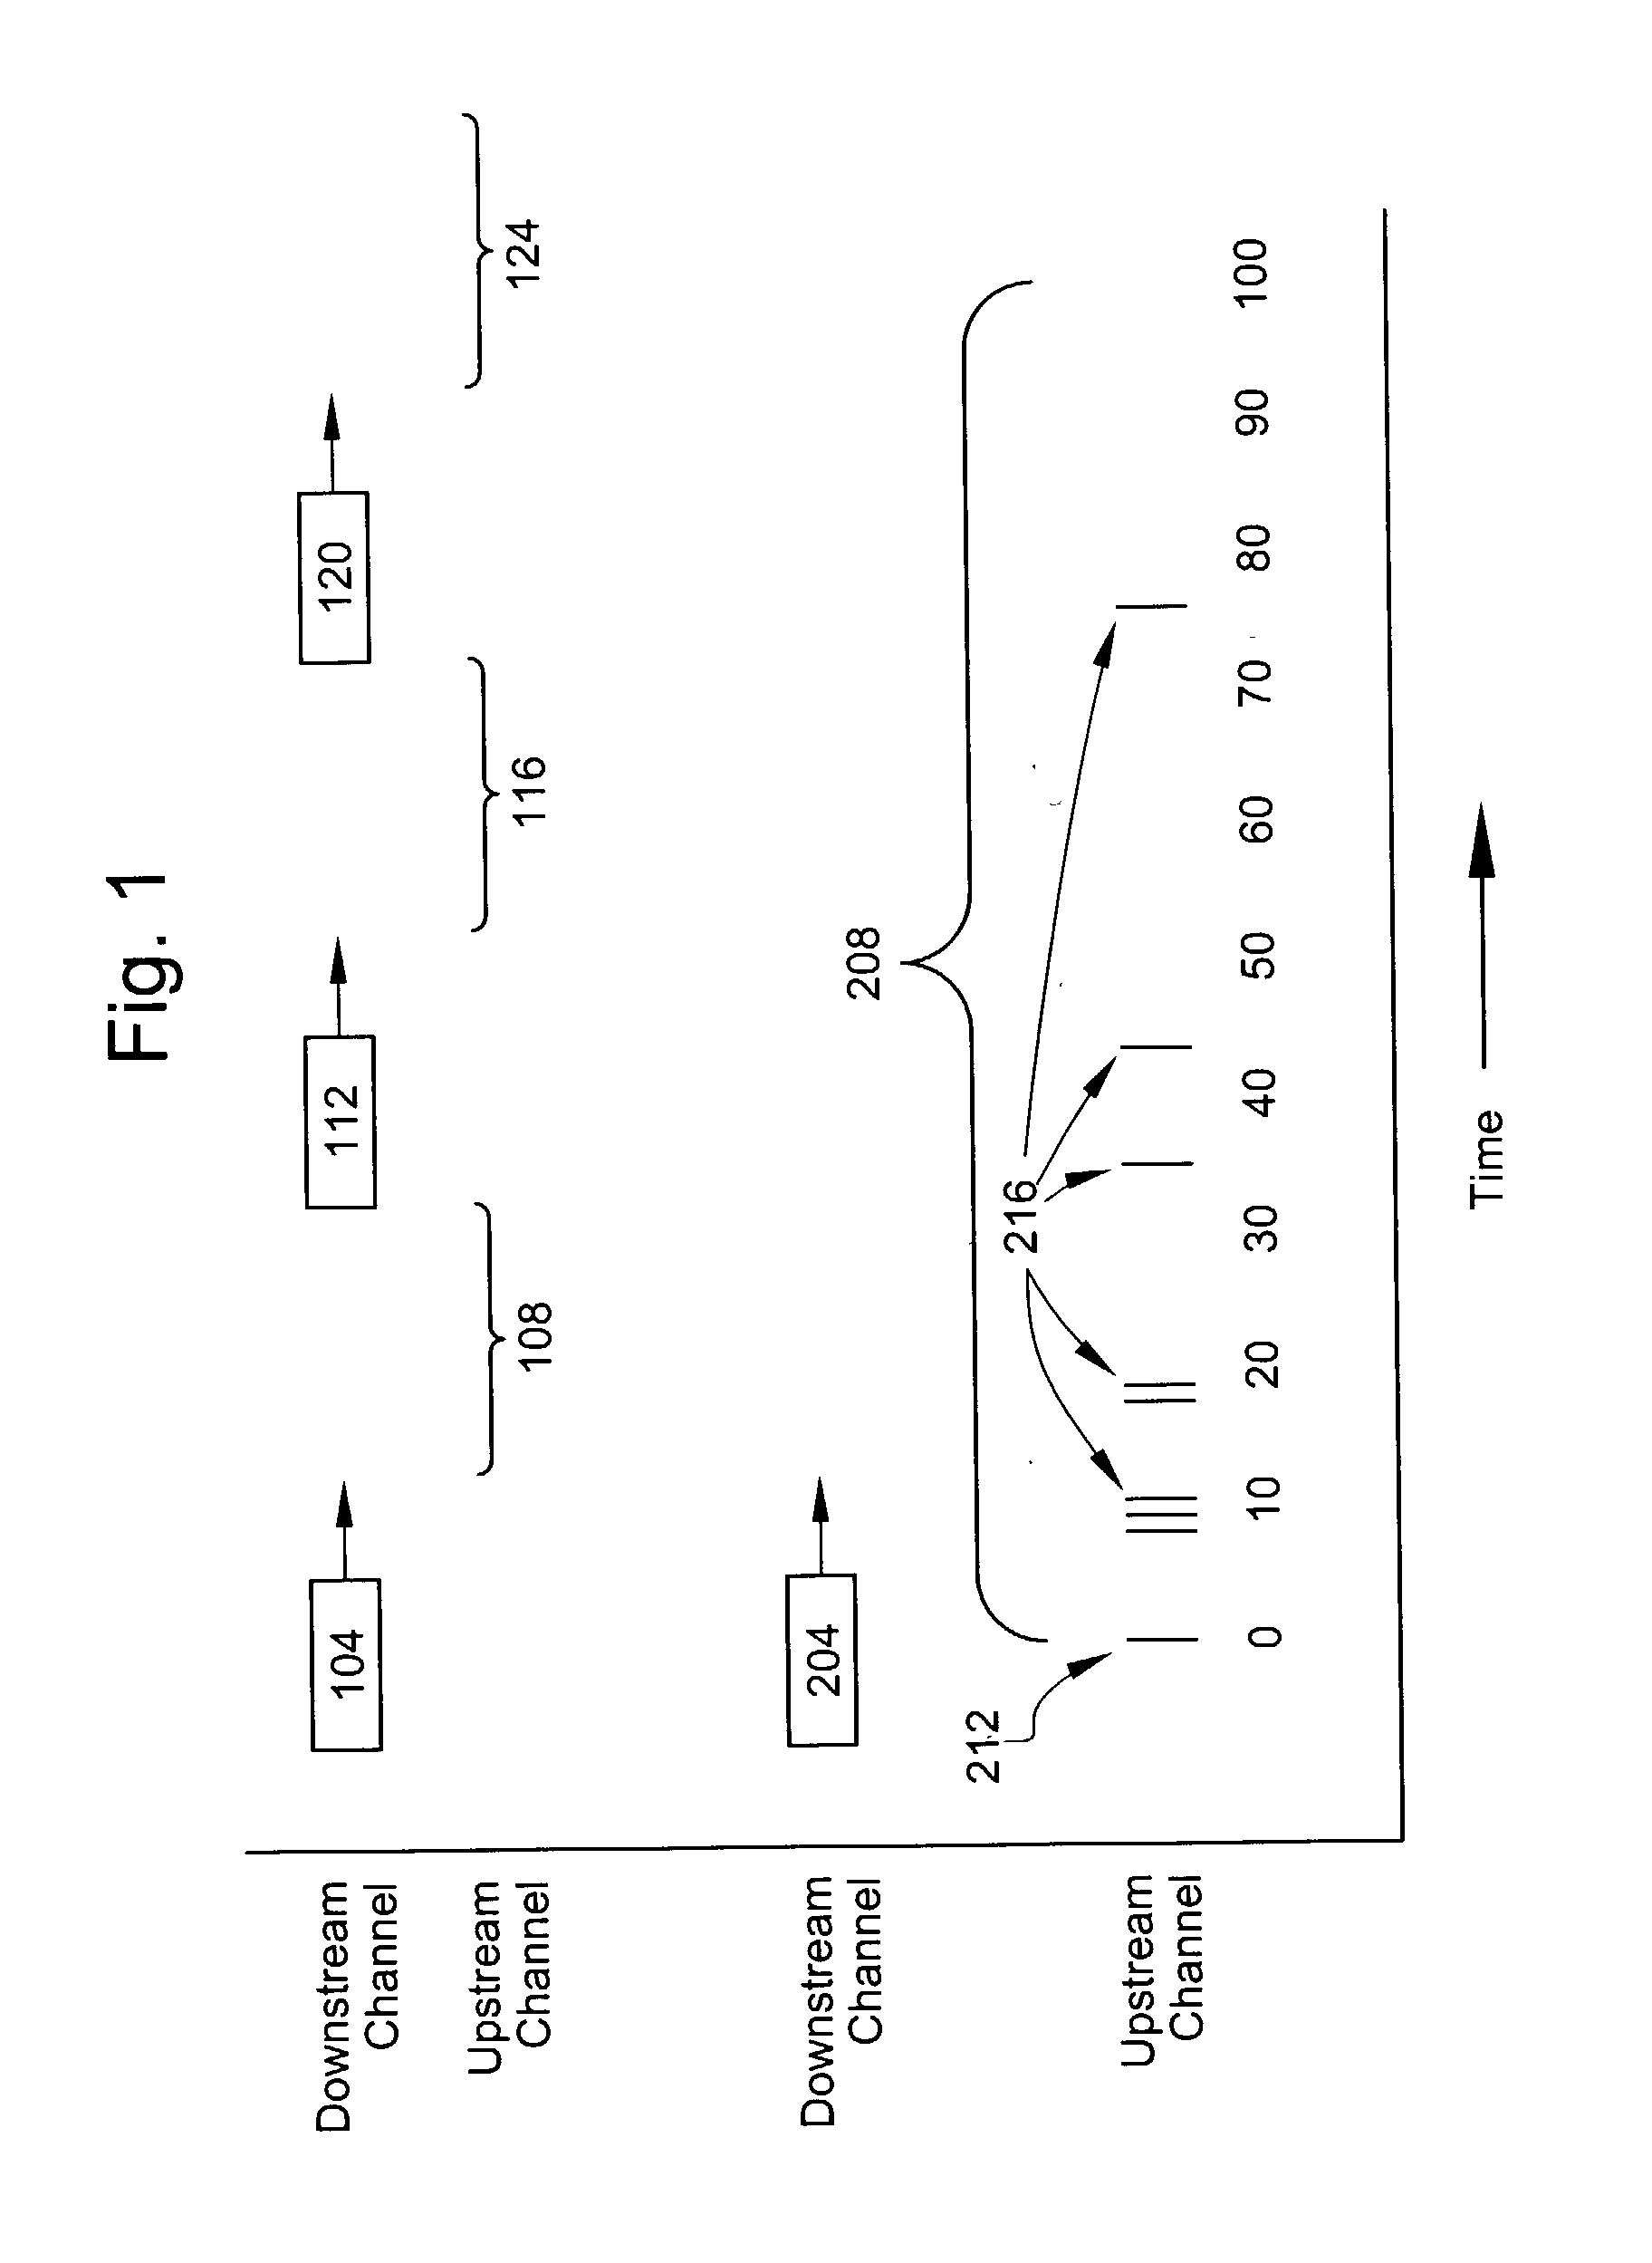 Methods for detecting and polling downstream modems